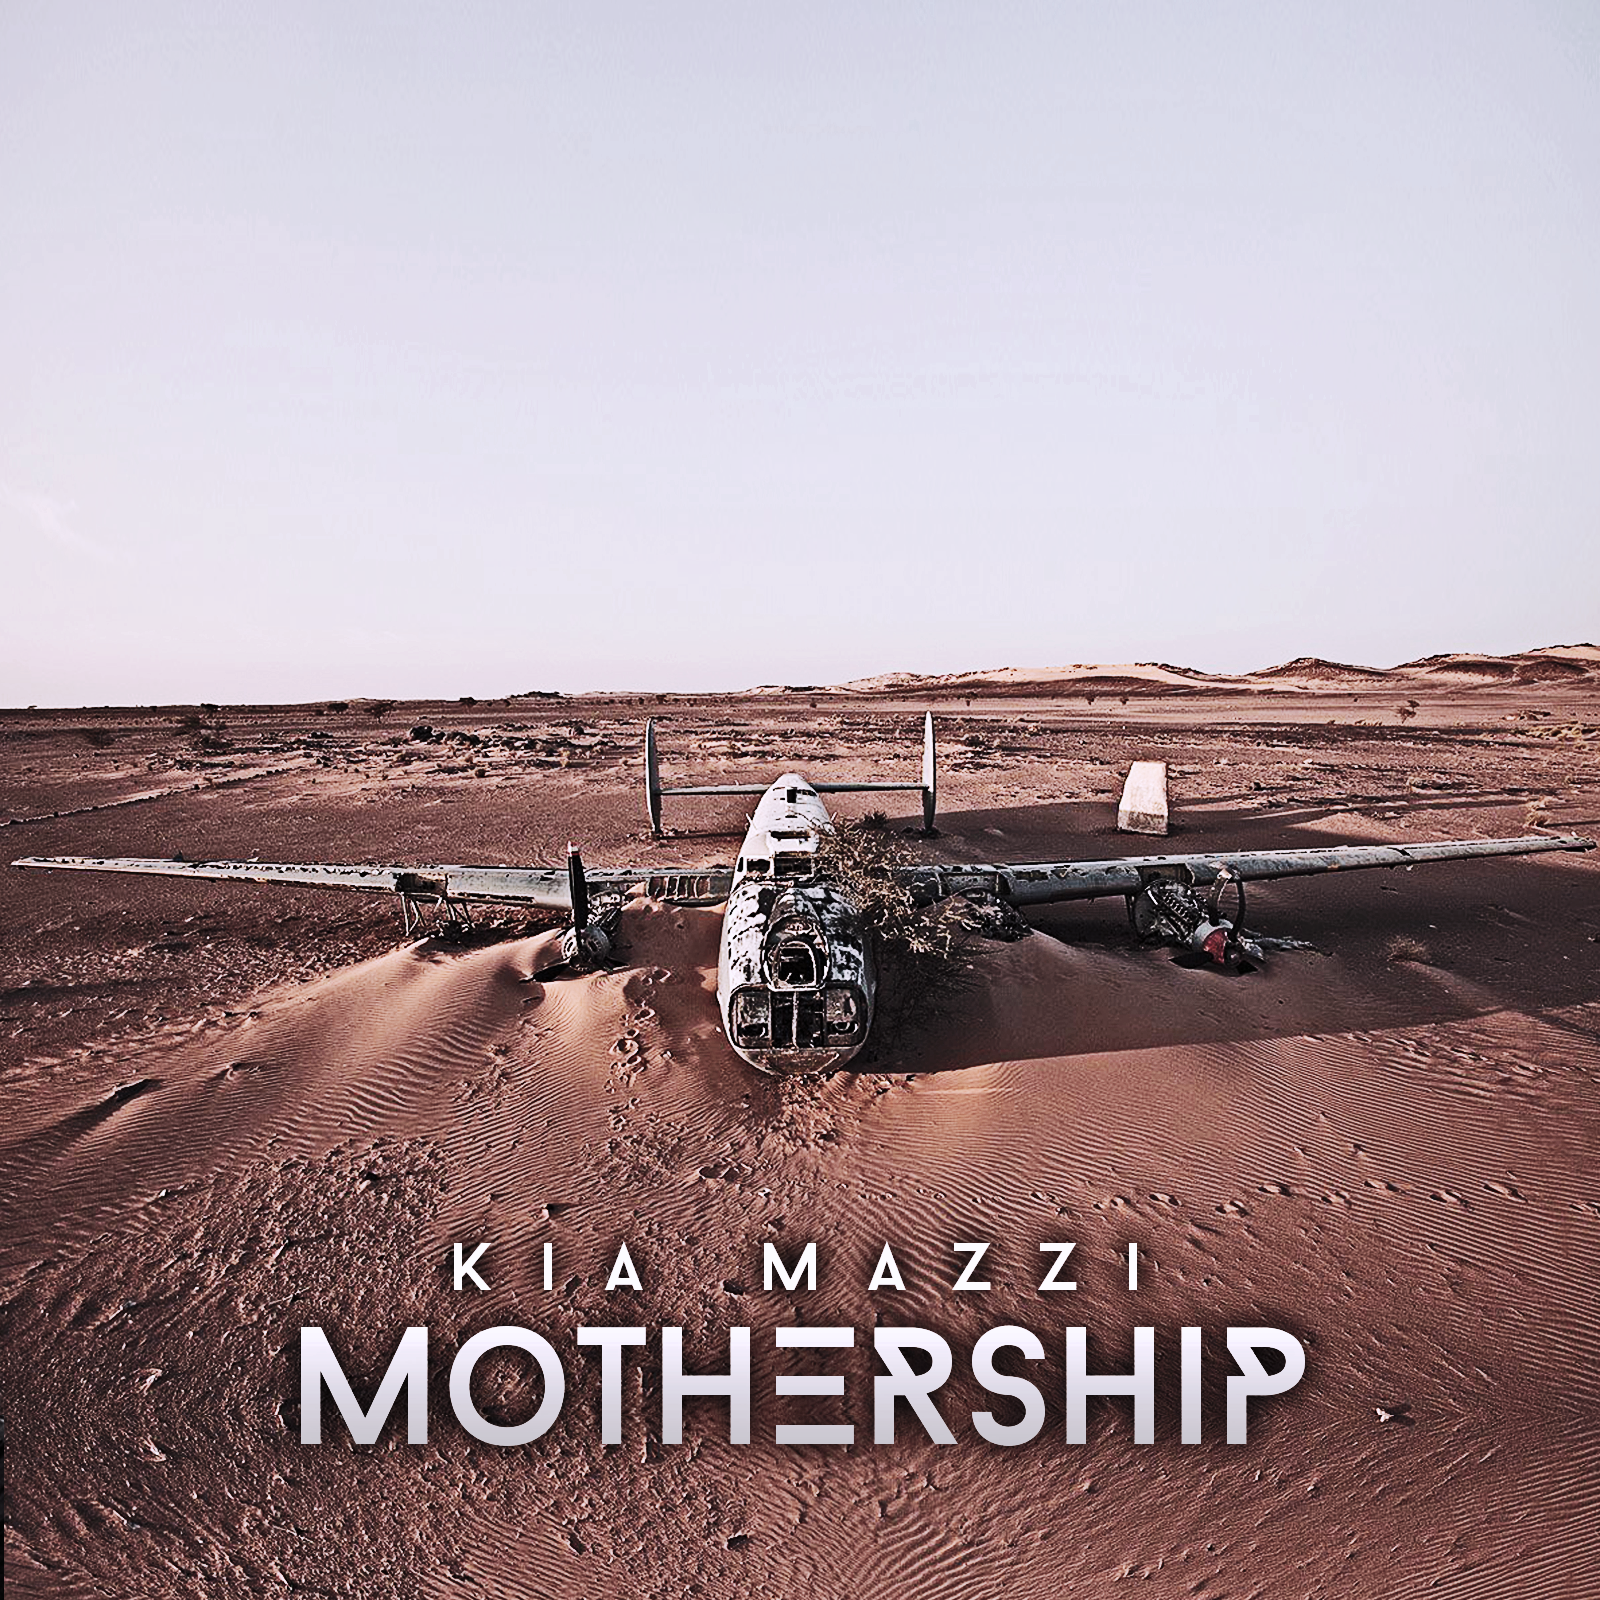 KIA MAZZI'S DEBUT ALBUM ‘MOTHERSHIP’ IS A TESTAMENT TO THE ARTIST’S INDEPENDENCE